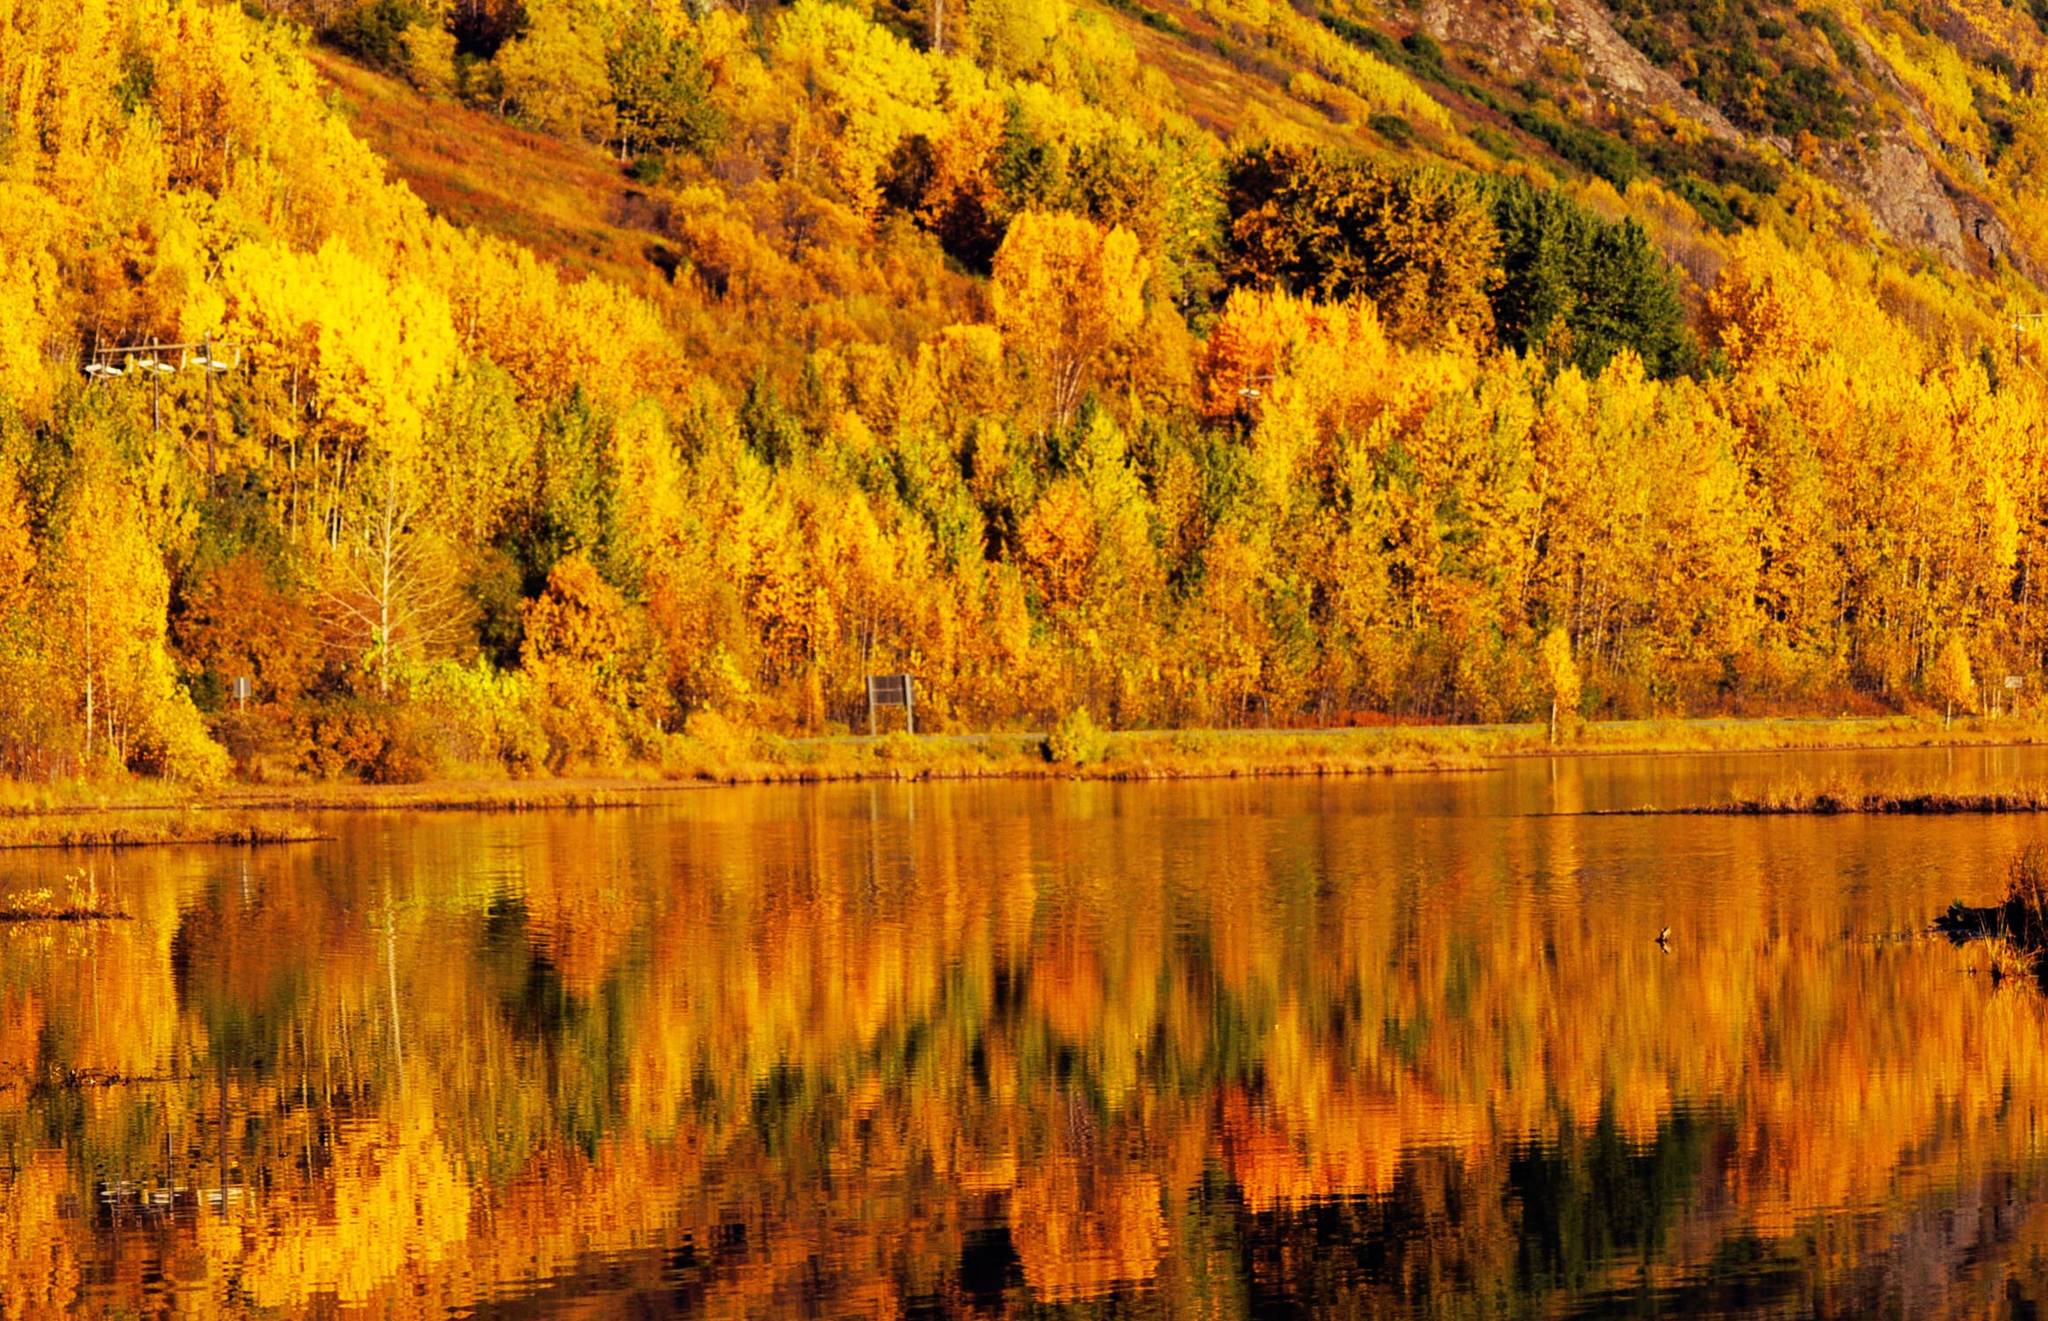 The stands of birch trees alight with fall colors line the Seward Highway near Tern Lake on Saturday, Sept. 30, 2017 near Cooper Landing, Alaska. The fall colors have hung onto the trees on the Kenai Peninsula this year, leading many out into the Kenai National Wildlife Refuge and Chugach National Forest to enjoy the sunshine between rain showers. Clouds dropped rain on the western Kenai Peninsula Wednesday and Thursday, but the National Weather Service predicts that sunshine will grace the area on Friday and Saturday, with highs in the low 50s. However, the forecast is for the rain to return Saturday night and continue through Sunday. (Photo by Elizabeth Earl/Peninsula Clarion)